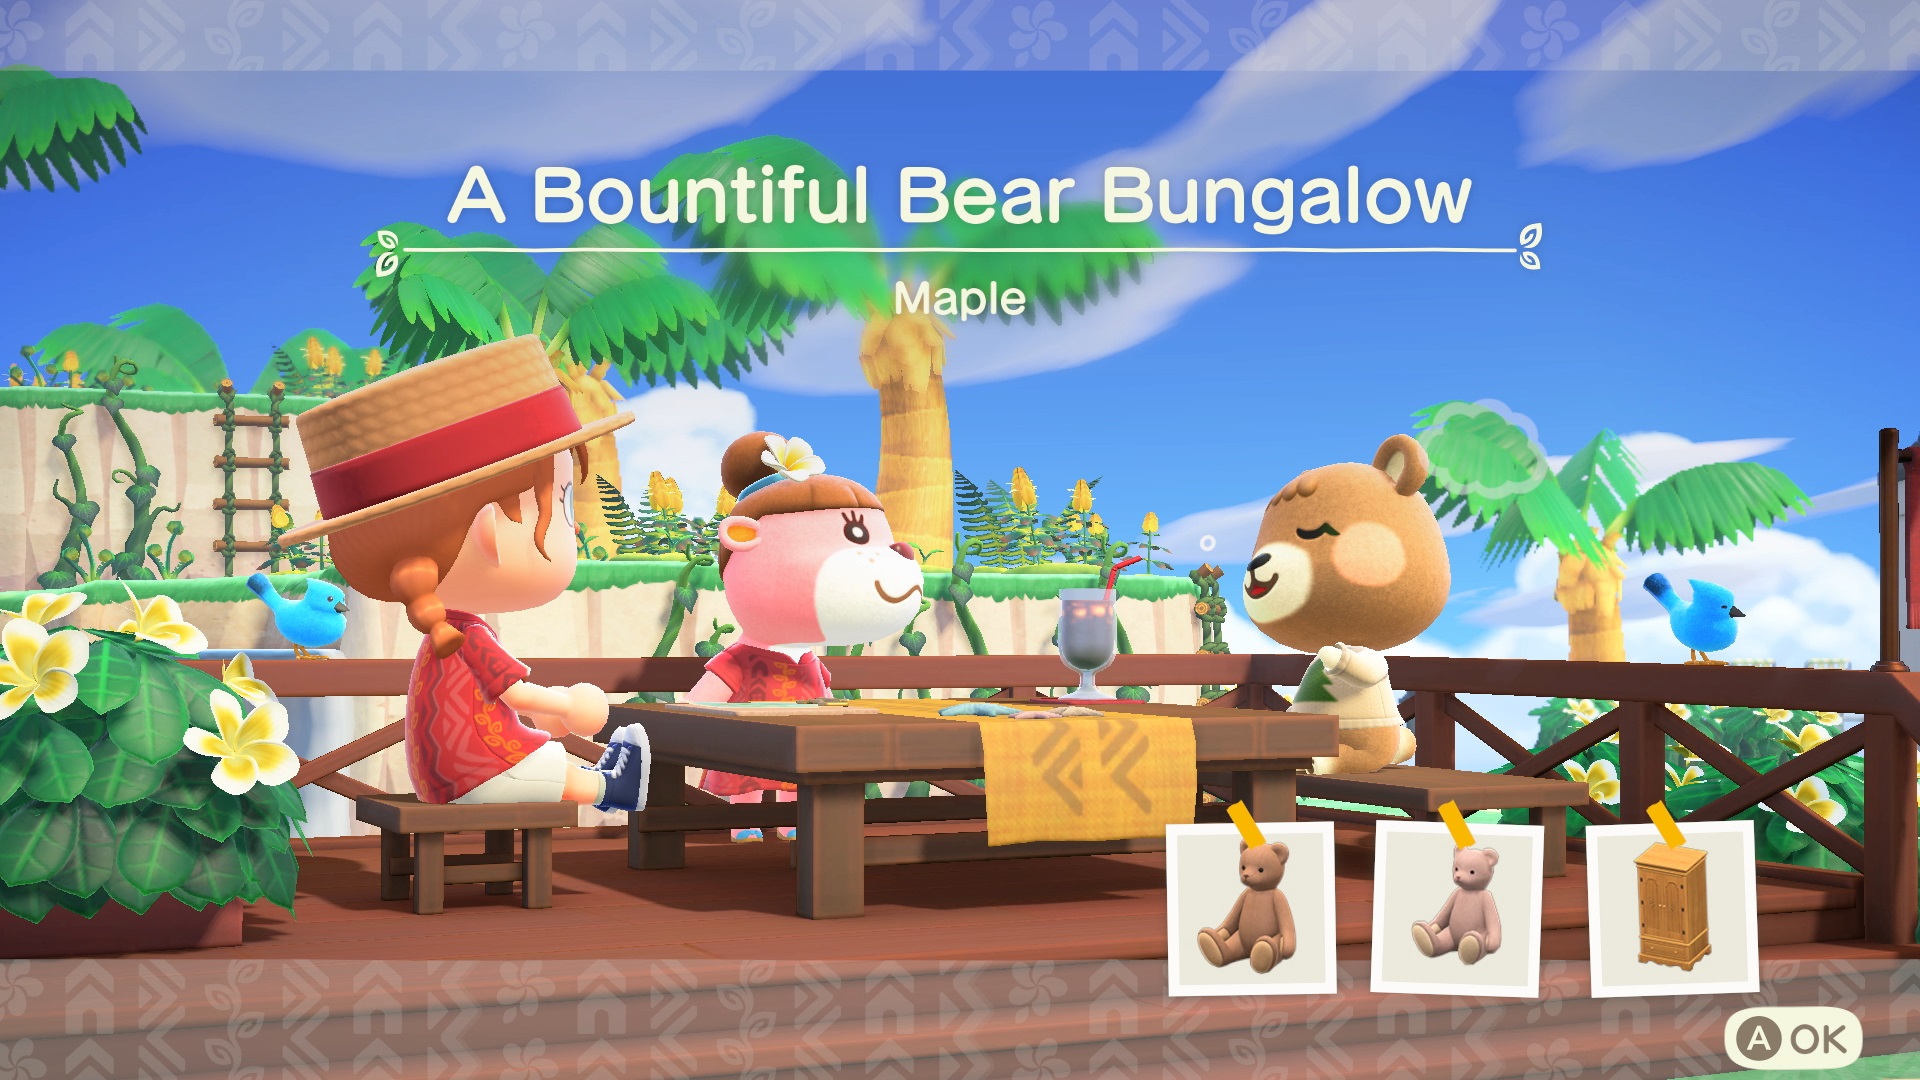 Do you want to see another animal crossing game? Or do you still